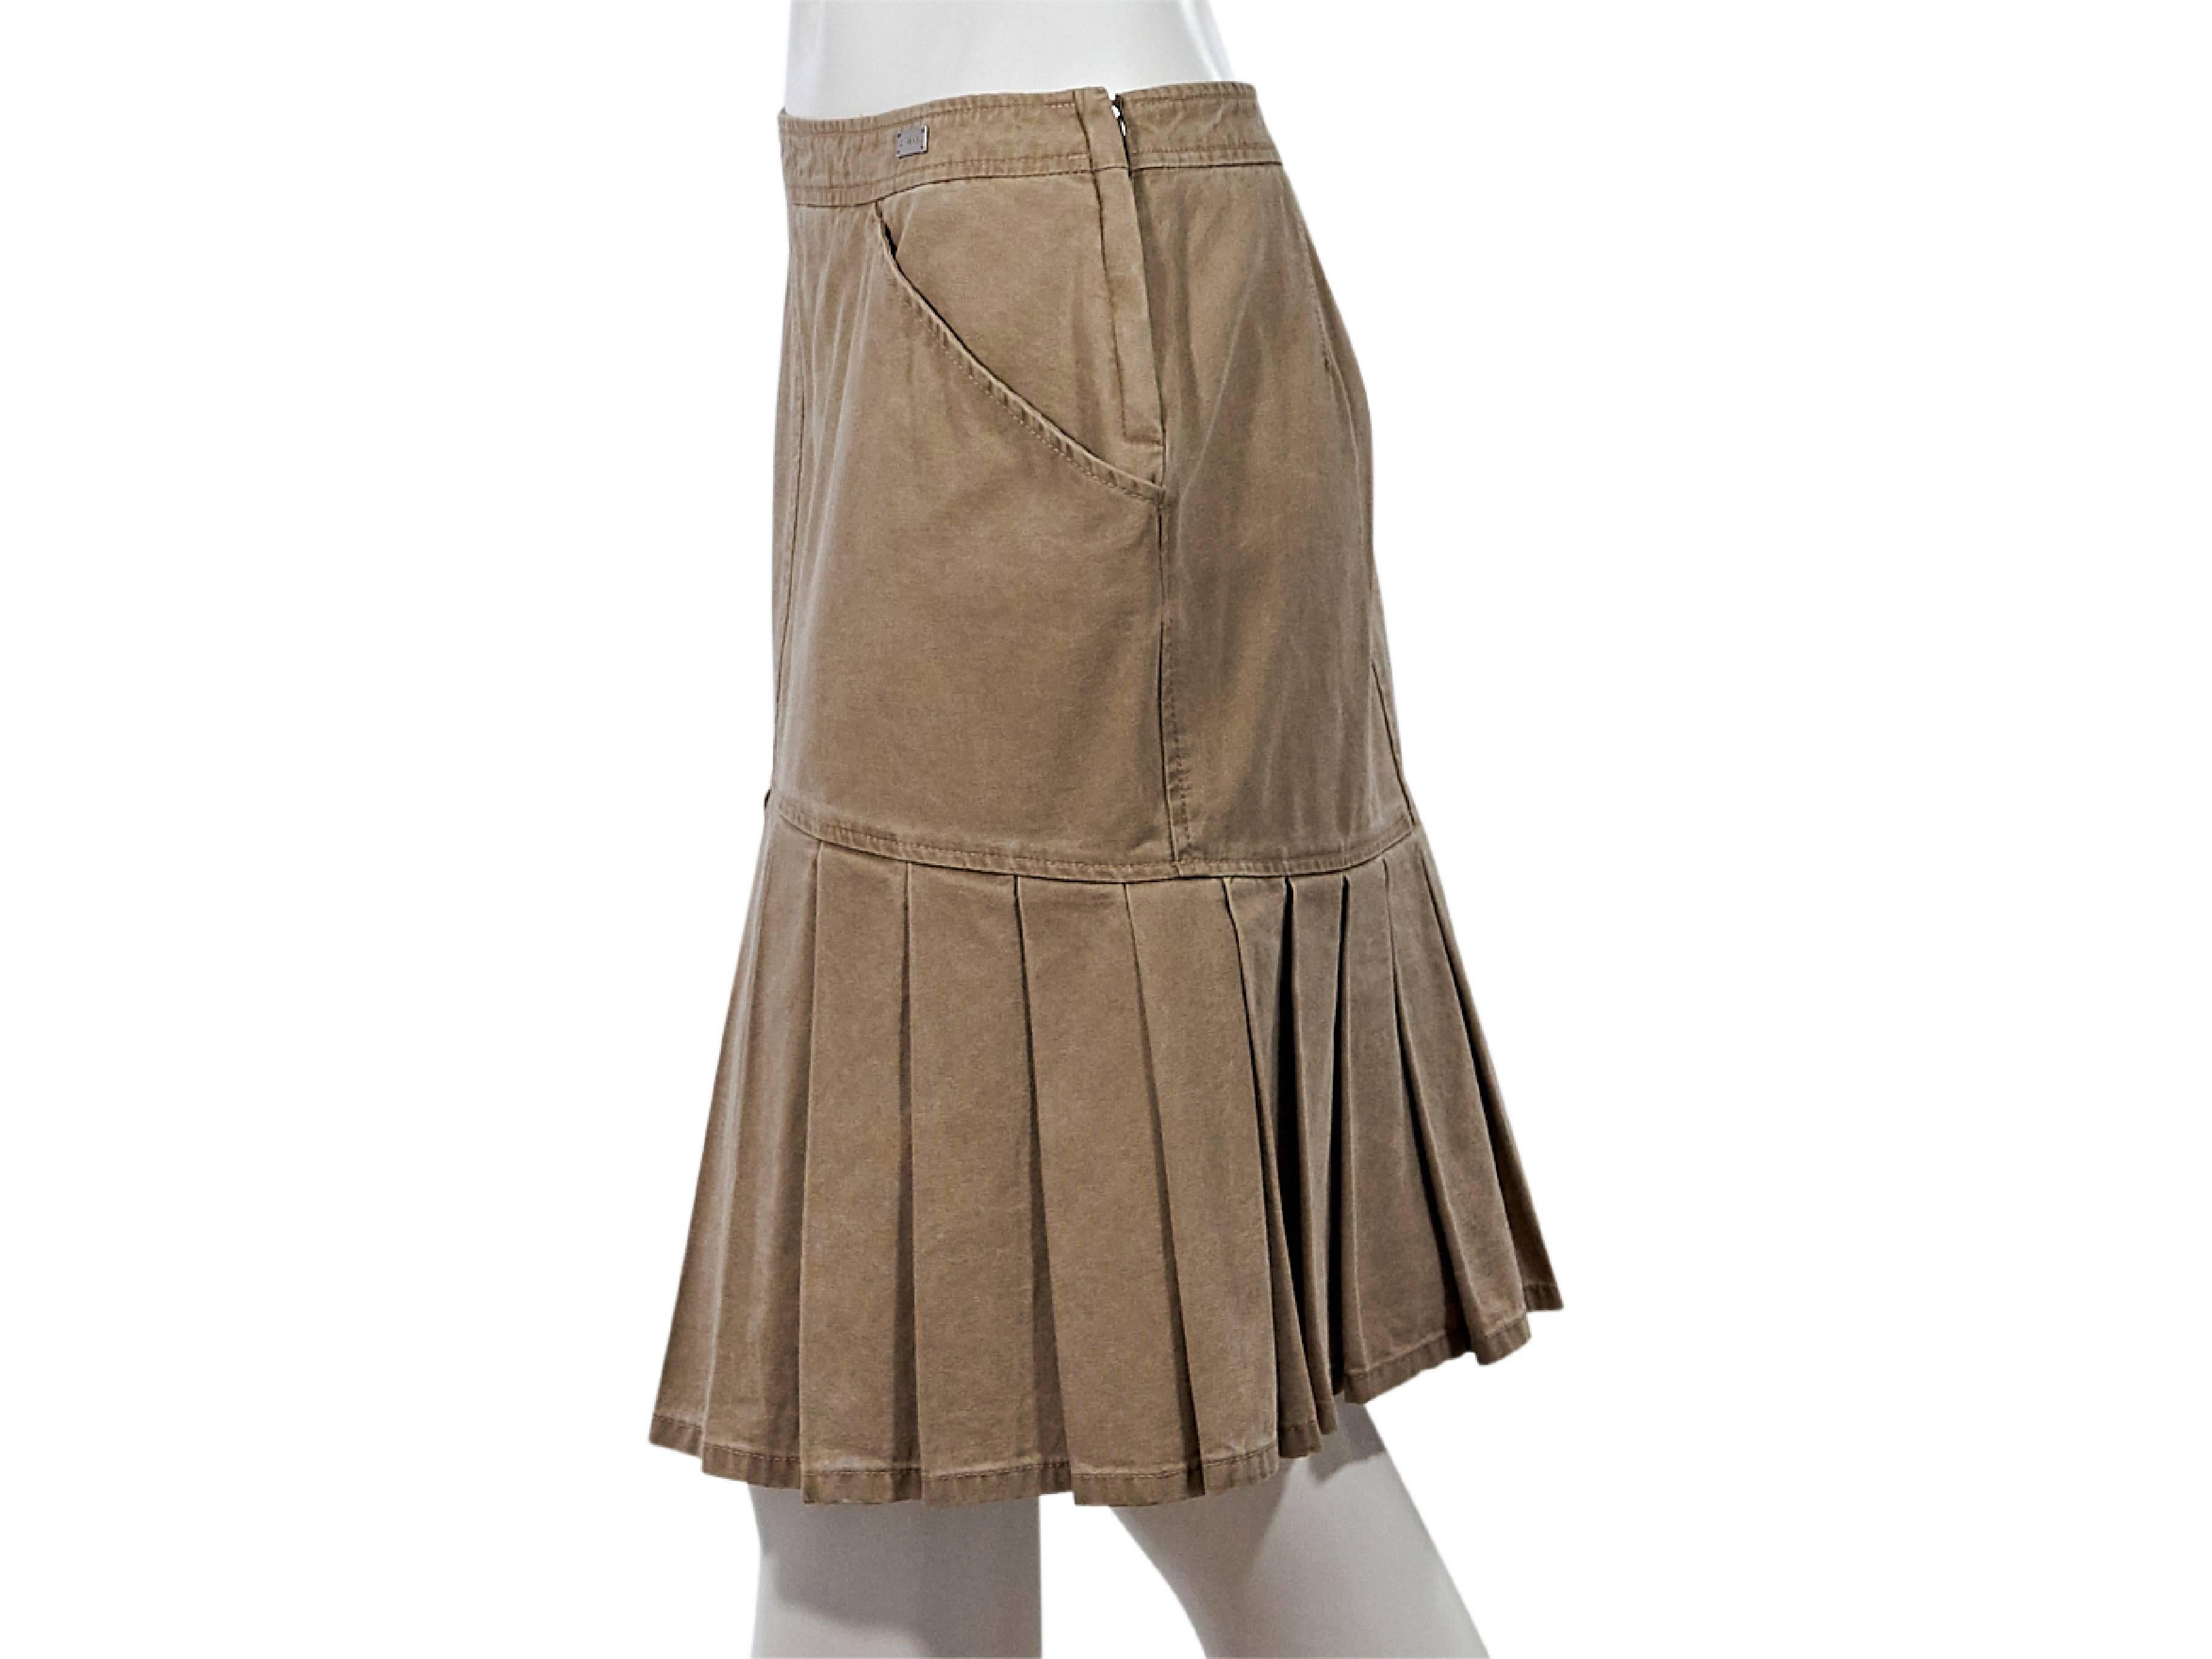 Product details:  Tan denim skirt by Chanel.  Banded waist.  Waist slant slide pockets.  Concealed side zip closure.  Box pleated hem.  Size 8
Condition: Pre-owned. Very good.

Est. Retail $ 1,500.00